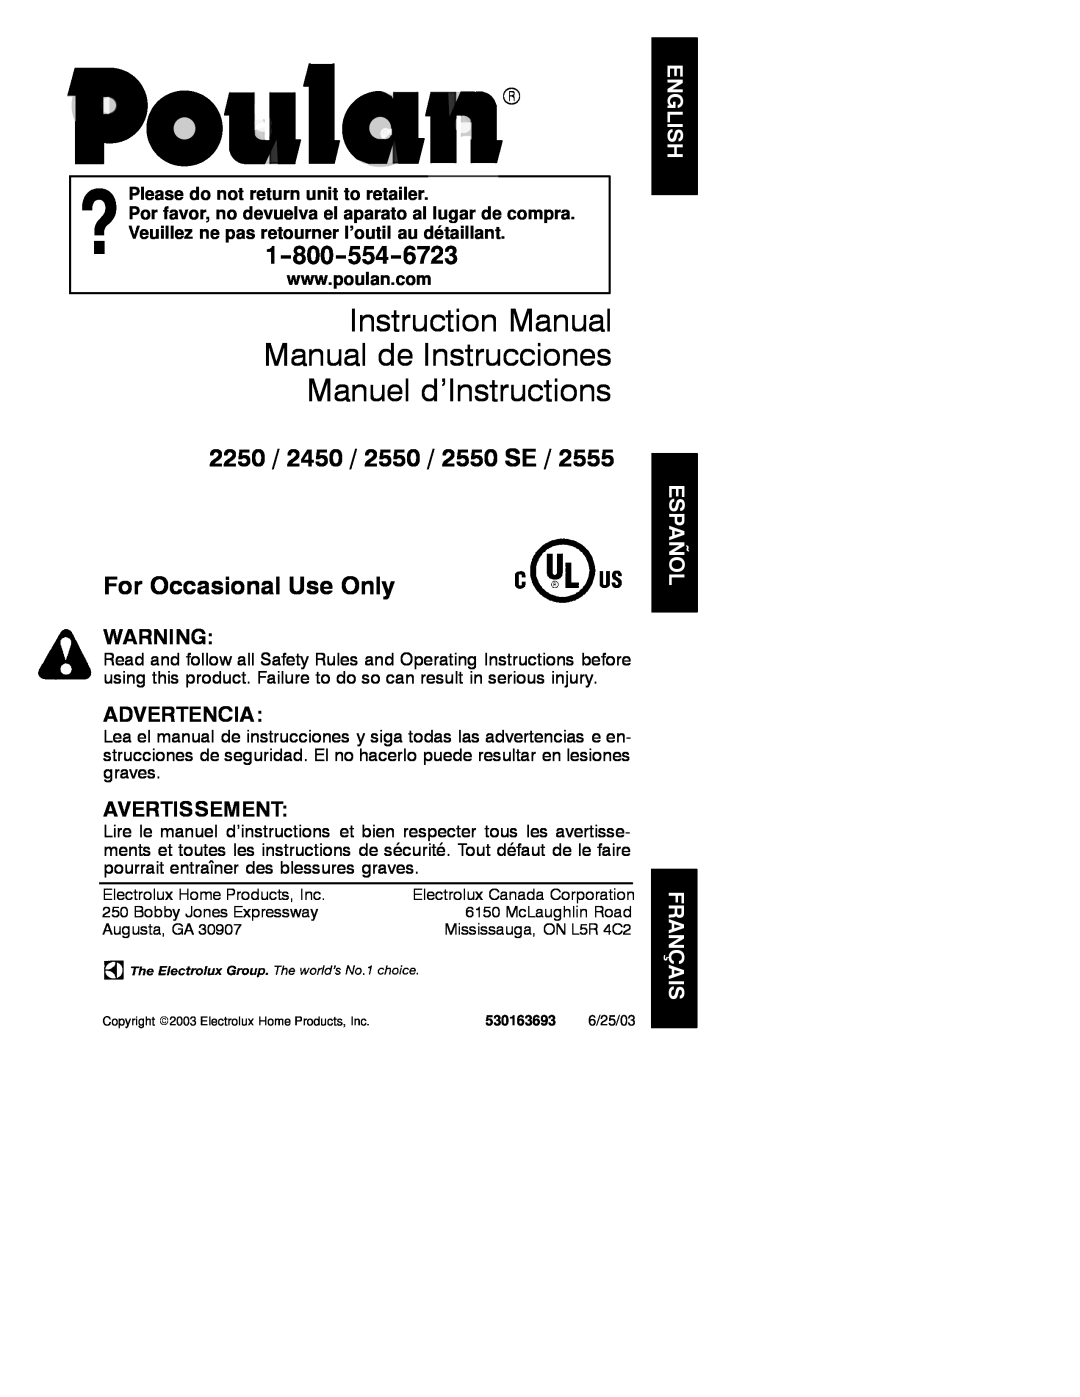 Poulan 2003-06 instruction manual Manuel d’Instructions, 2250 / 2450 / 2550 / 2550 SE, For Occasional Use Only 